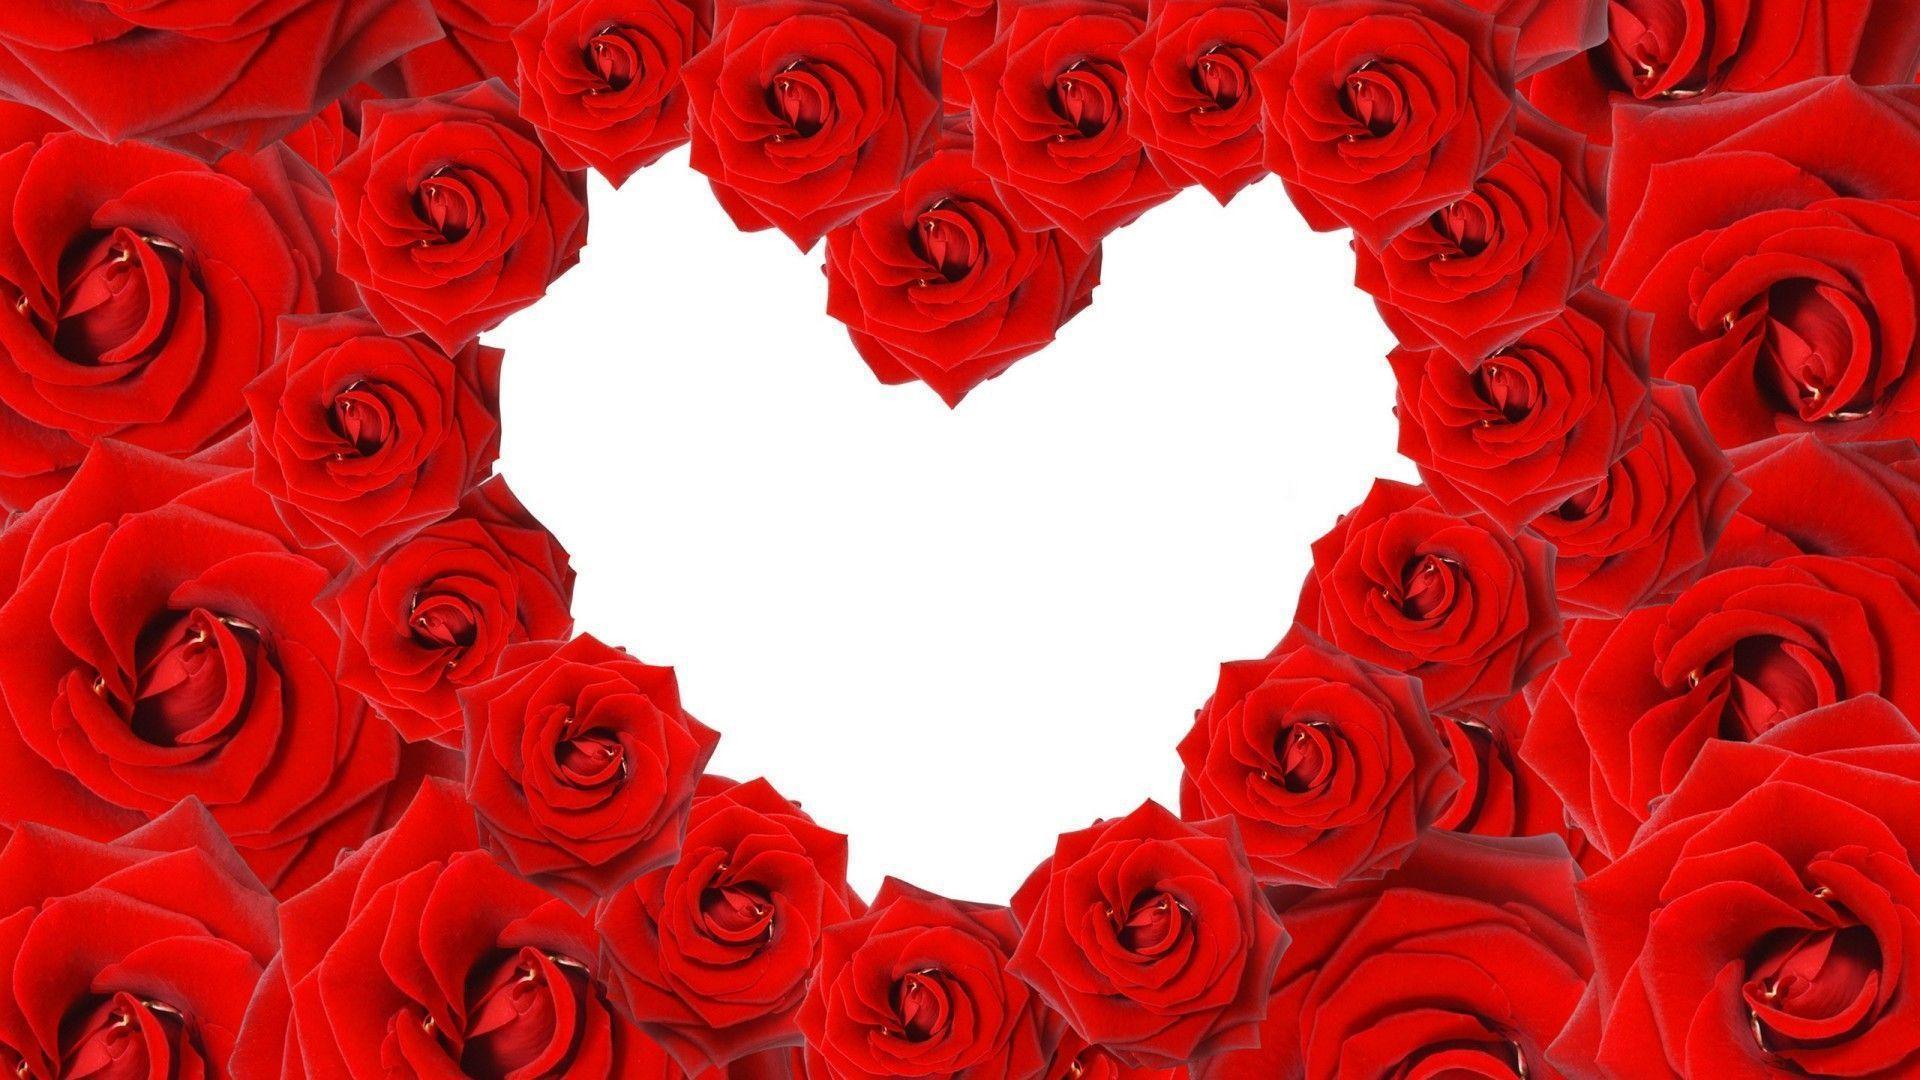 Red roses in a heart shape on white backgrounds wallpapers and